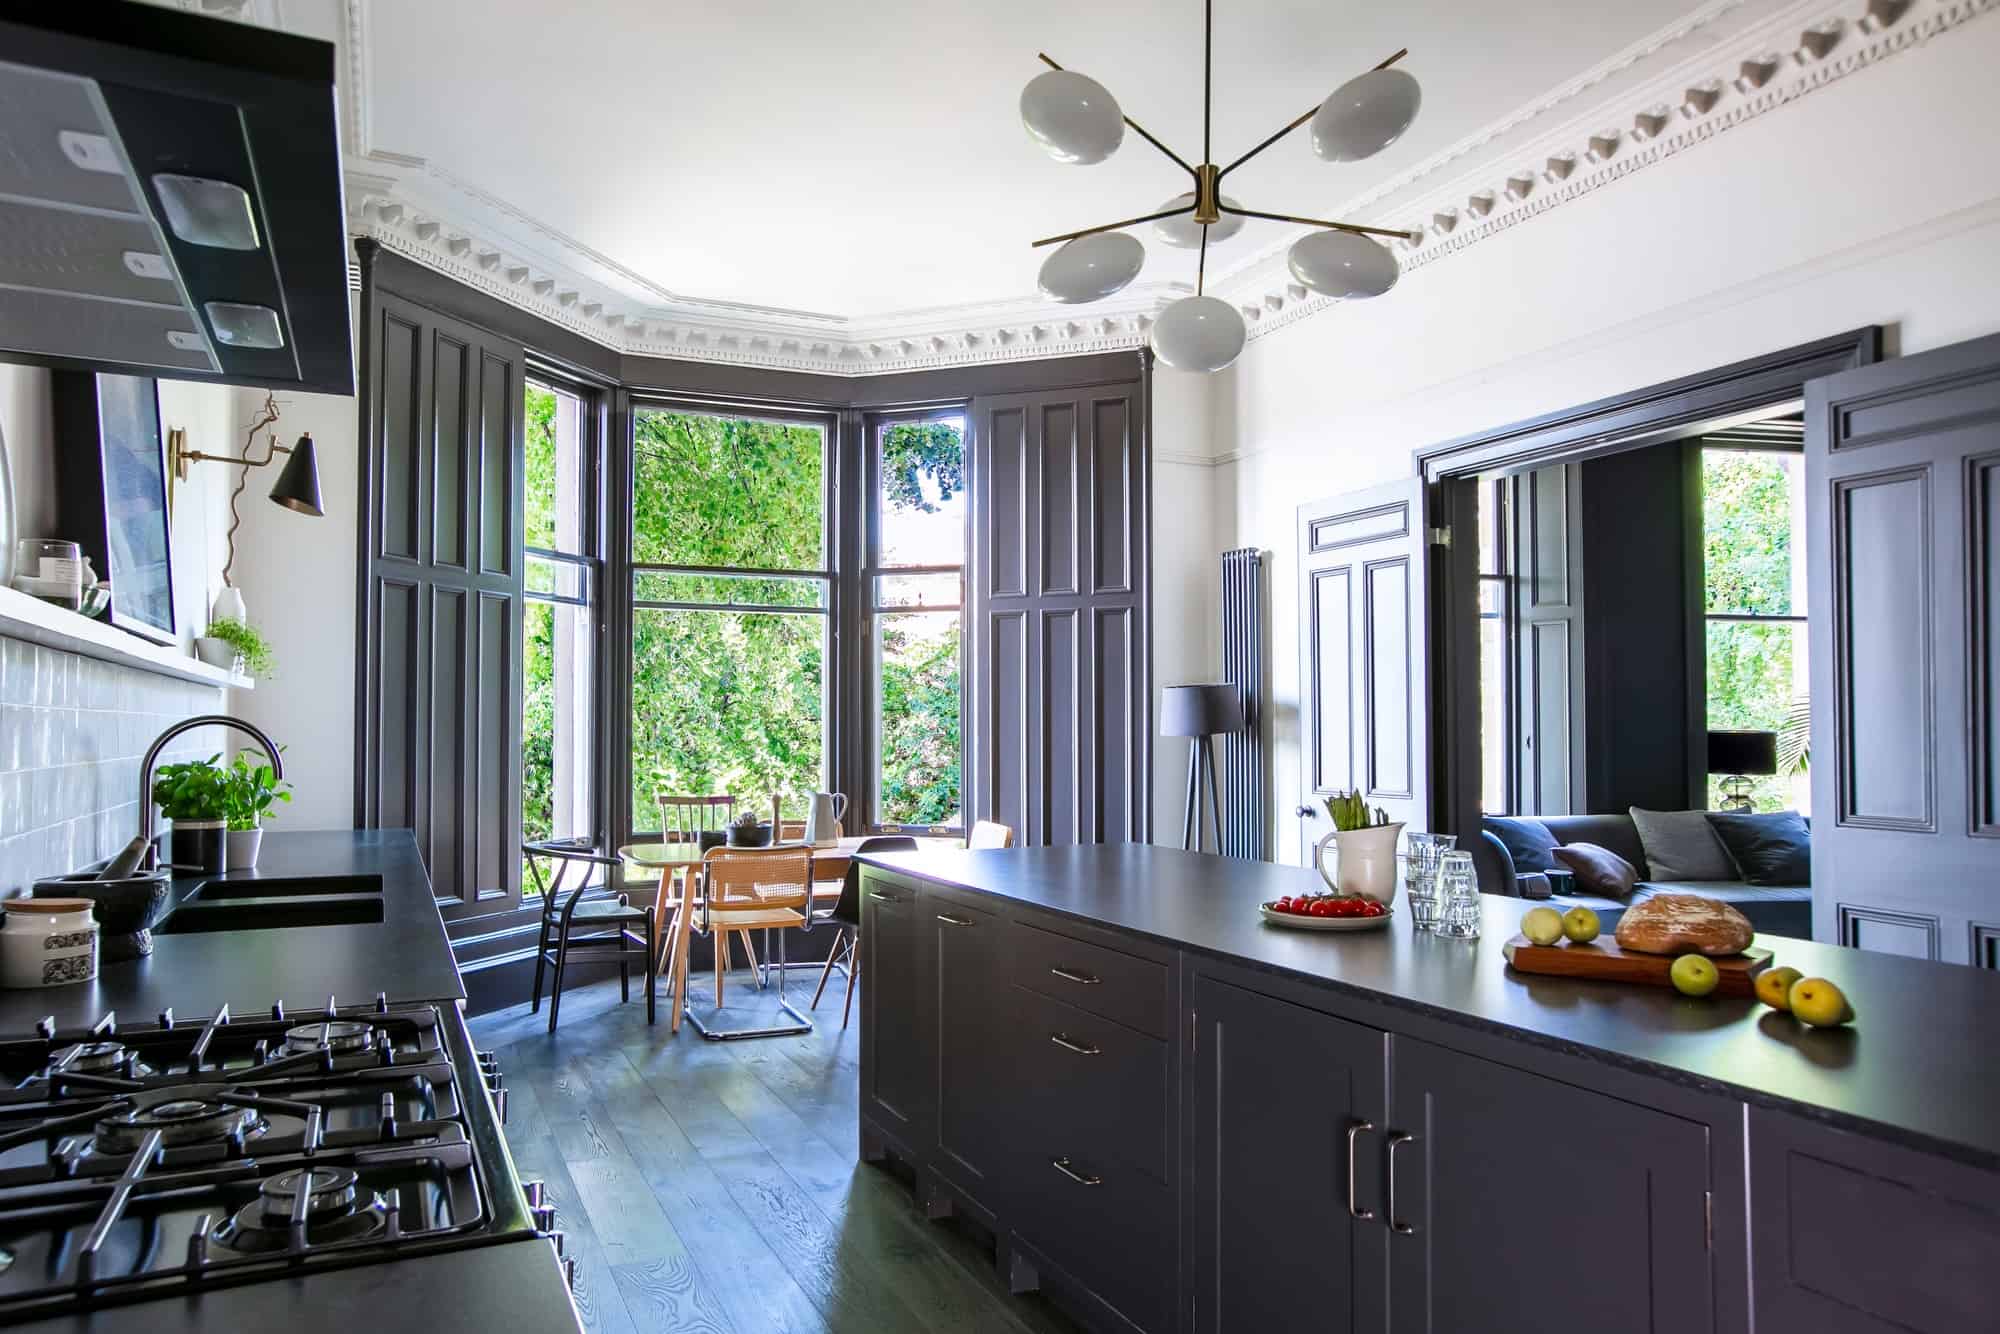 Buckingham G12 - A spacious apartment in the West End of Glasgow with period features and dramatic dark contemporary interiors - The Location Guys